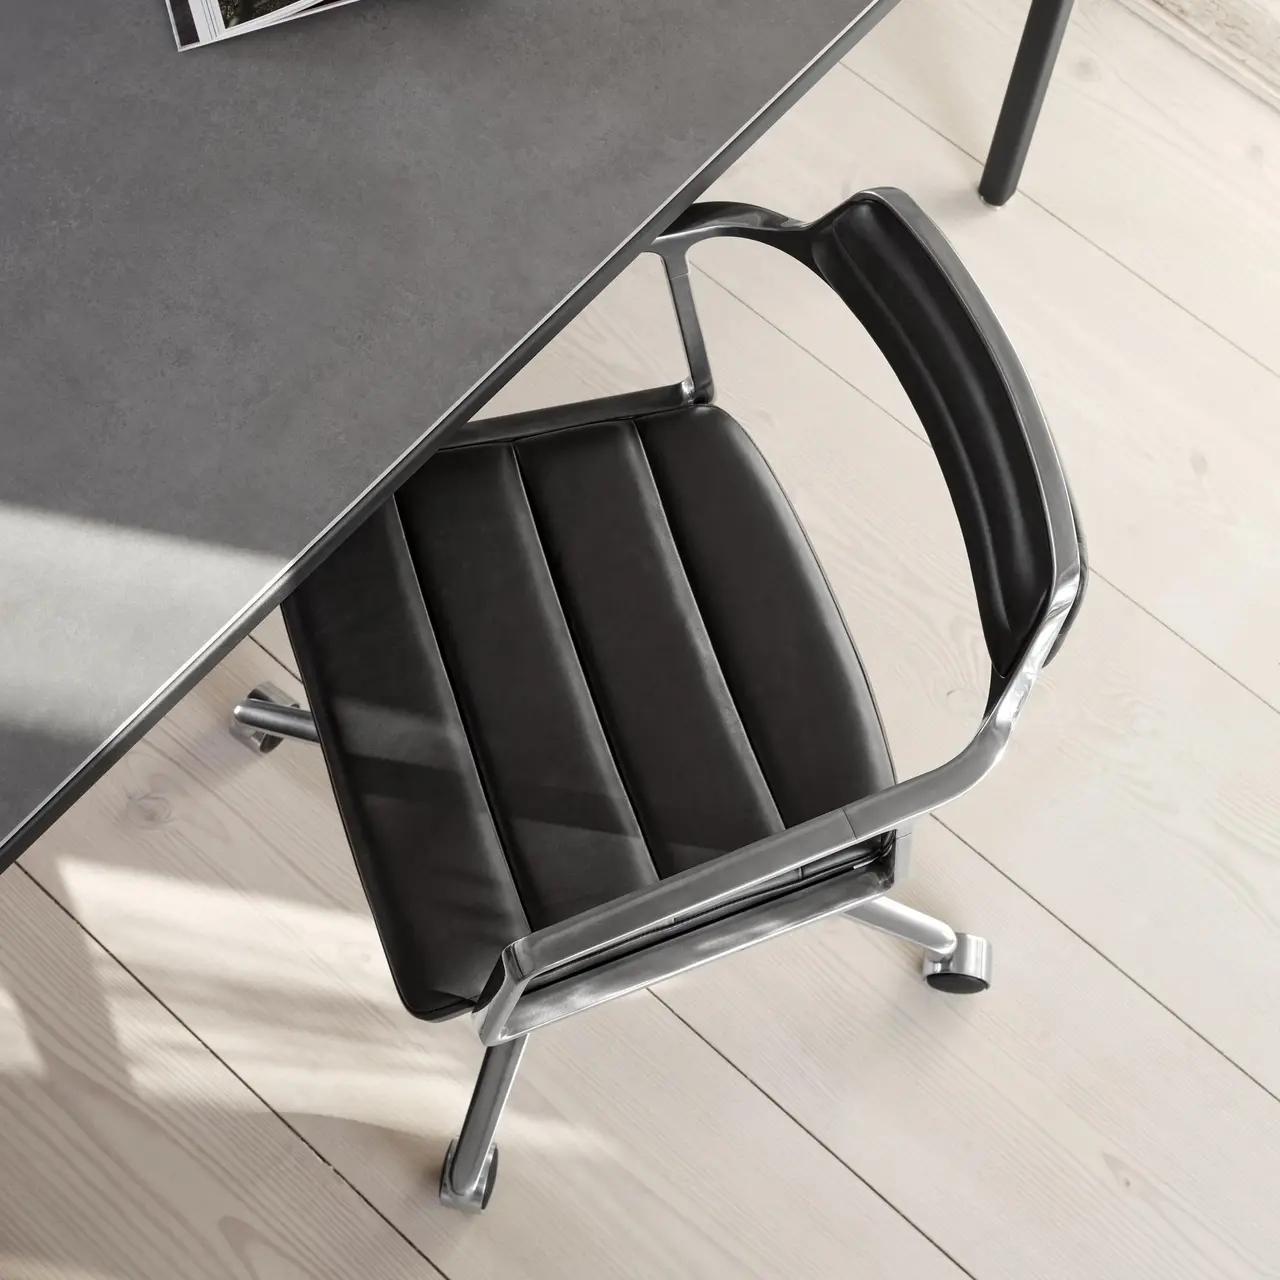 VIPP 452 // SWIVEL CHAIR - BLACK LEATHER, POLISHED FRAME, CASTERS